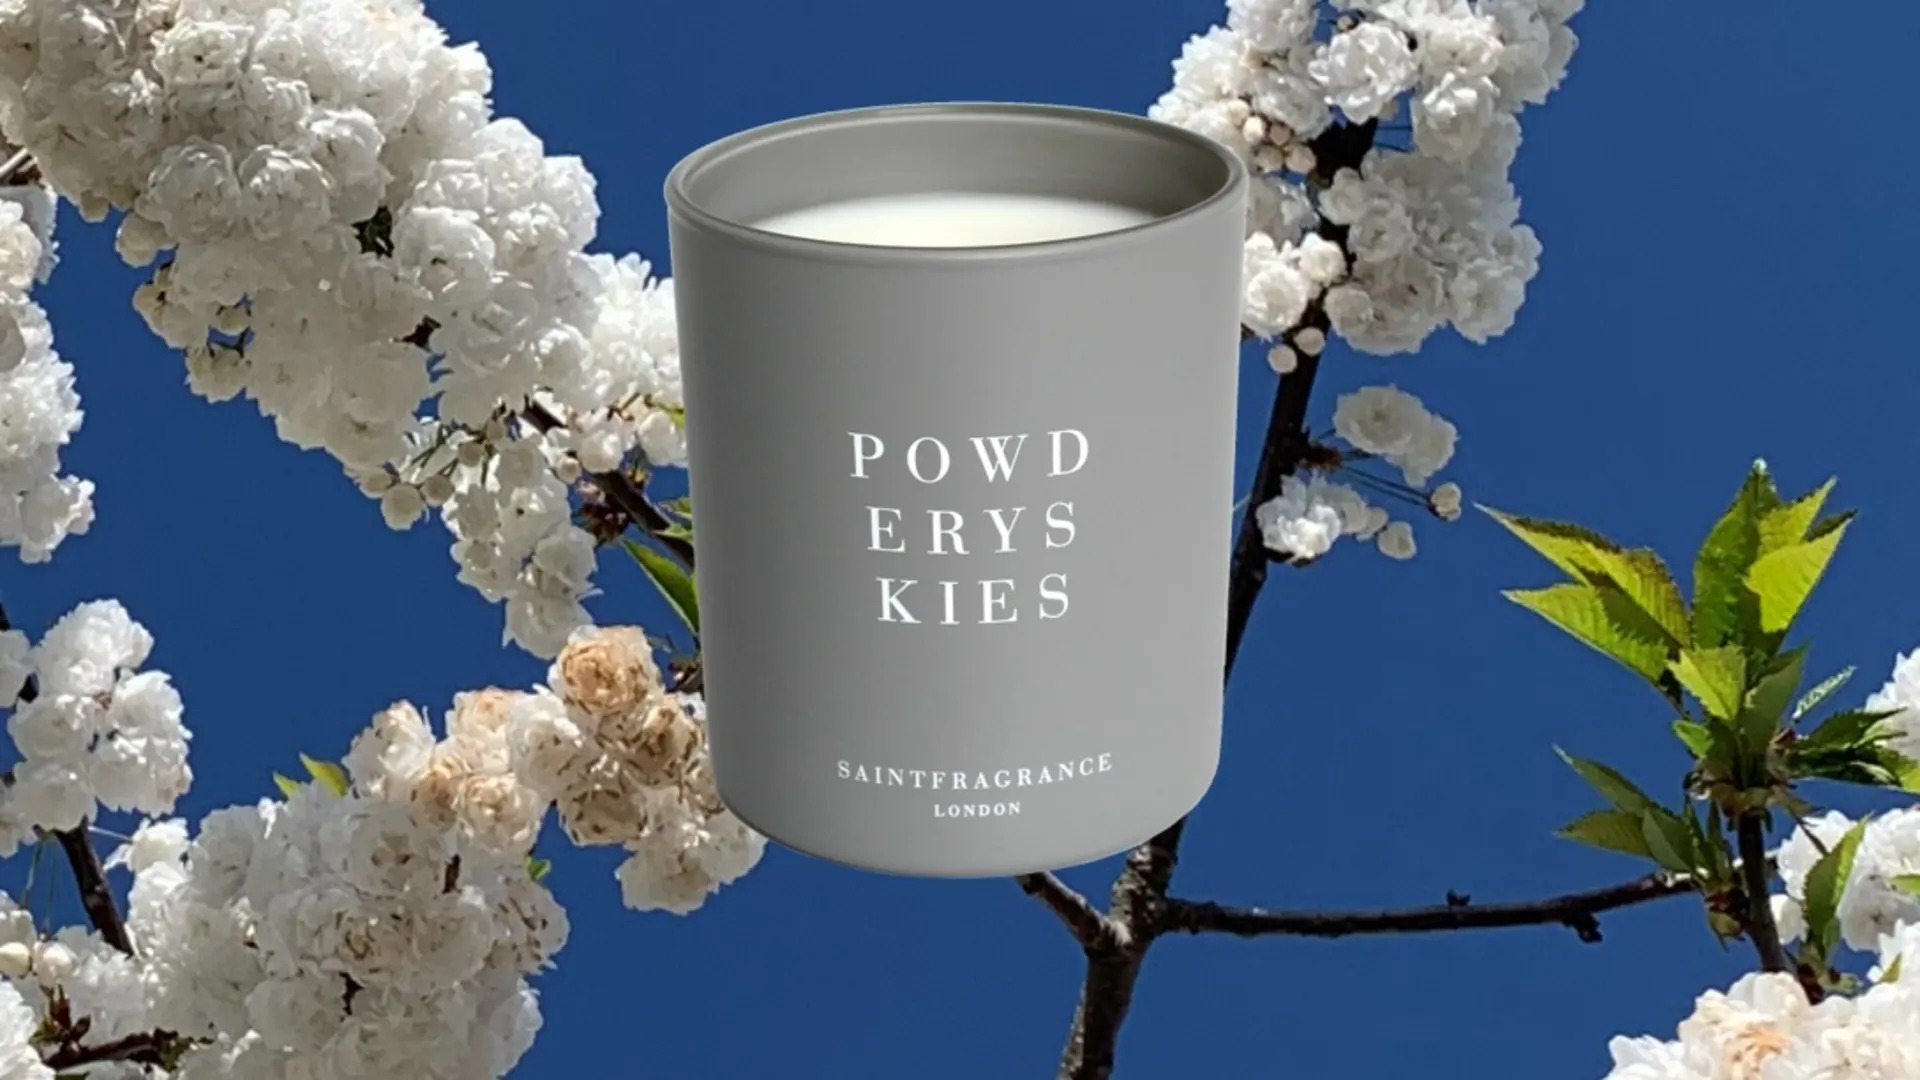 A Saint Fragrance Powdery Skies scented candle on a blue background with white flowers